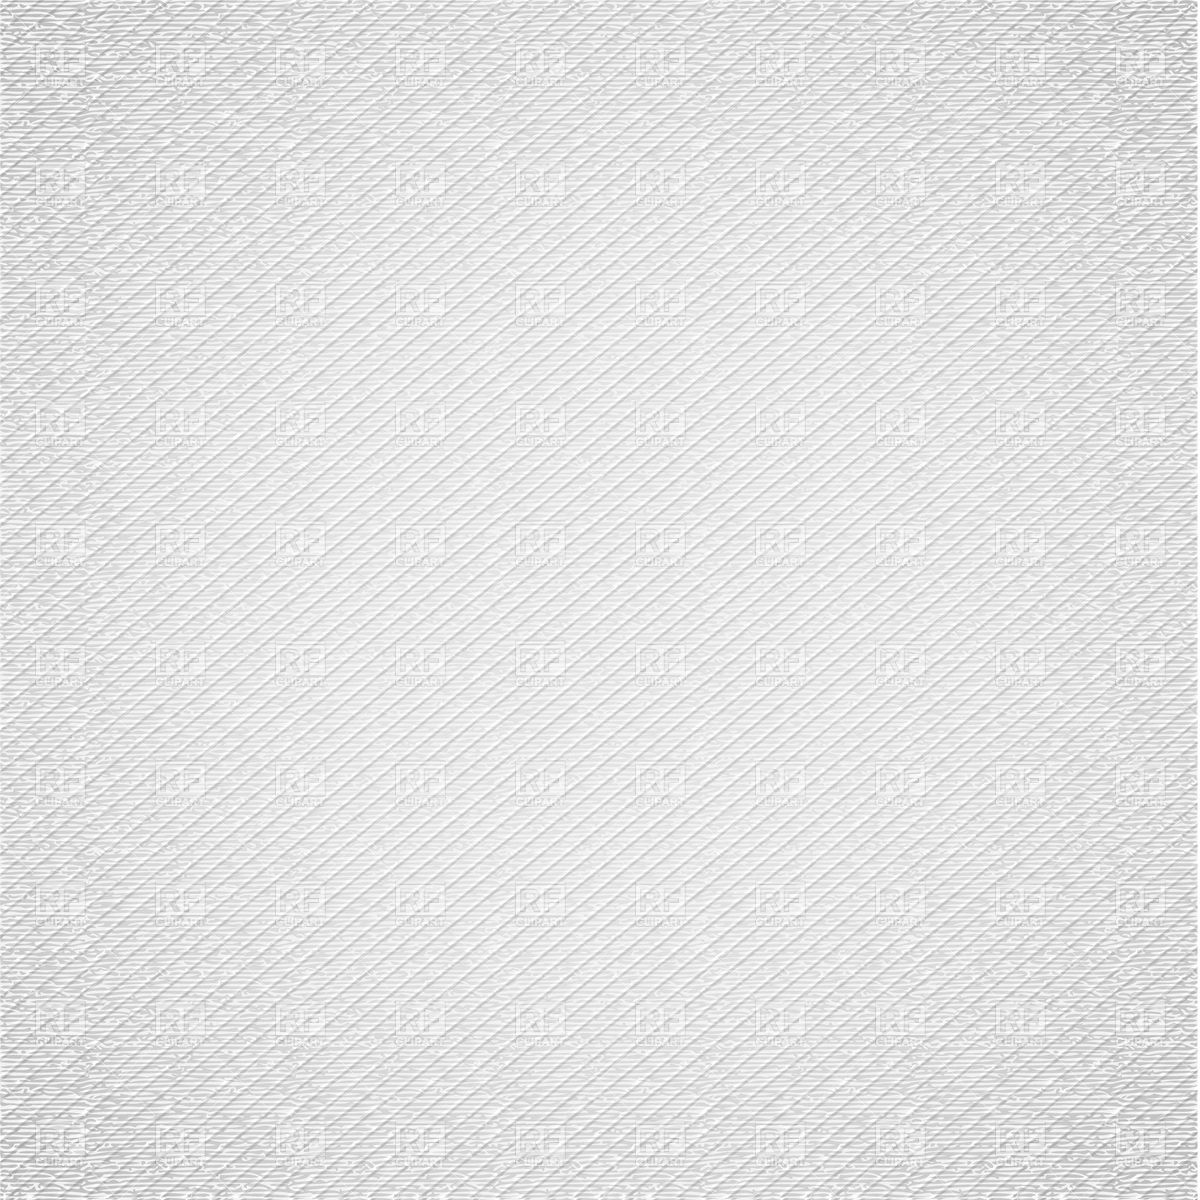 Light Gray Striped Cardboard Background Background Textures